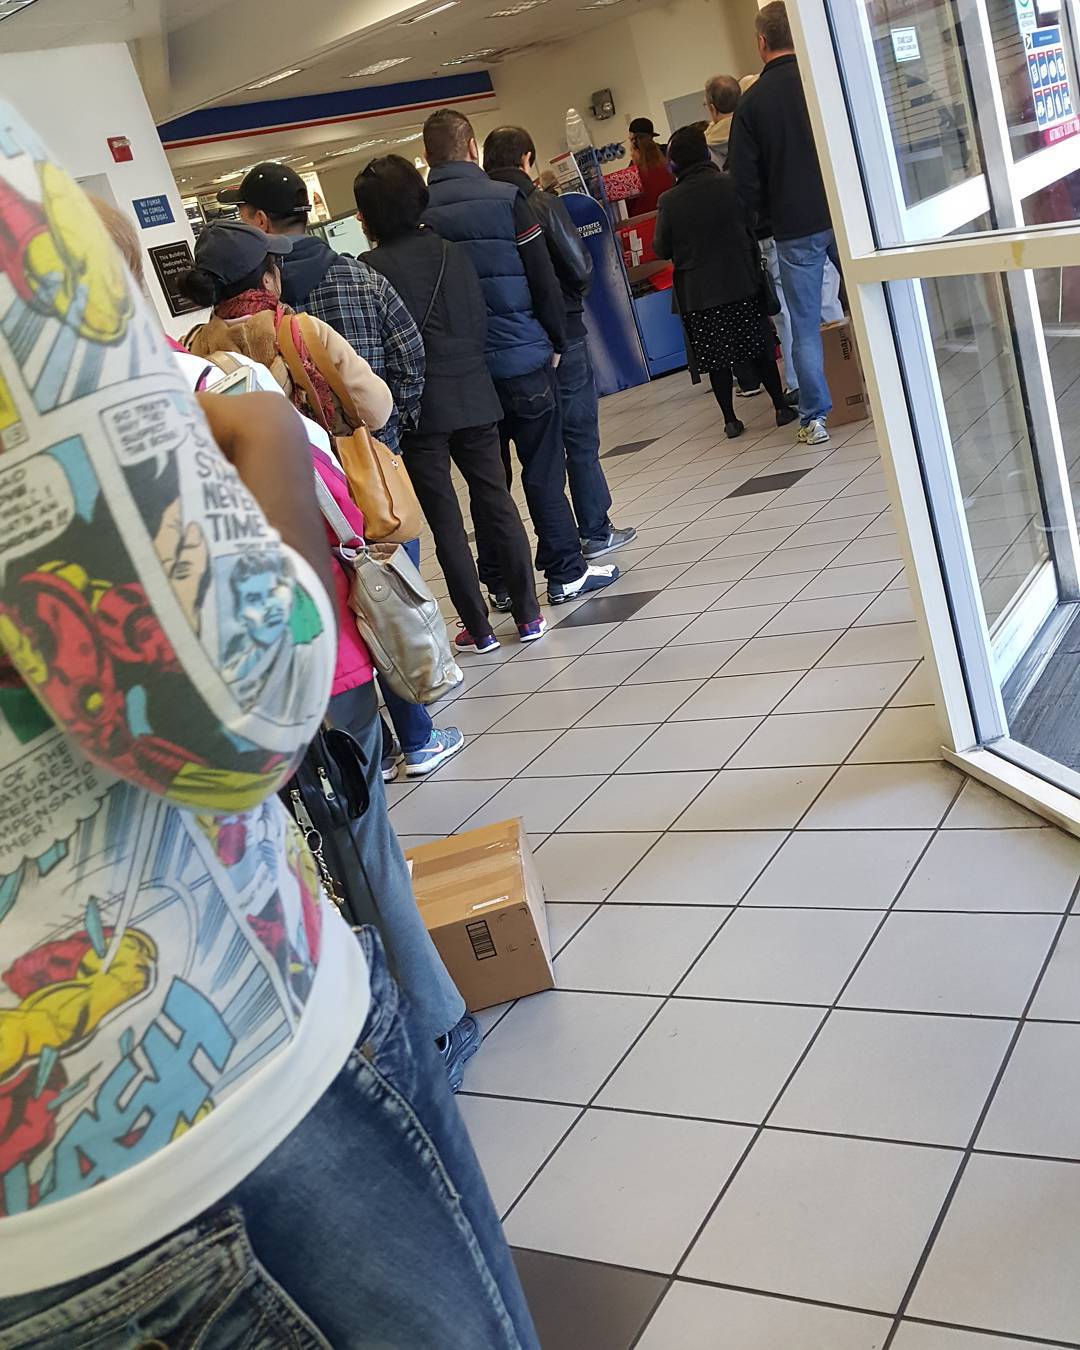 This post office is no joke. I don&rsquo;t care tho&hellip;. my fans come